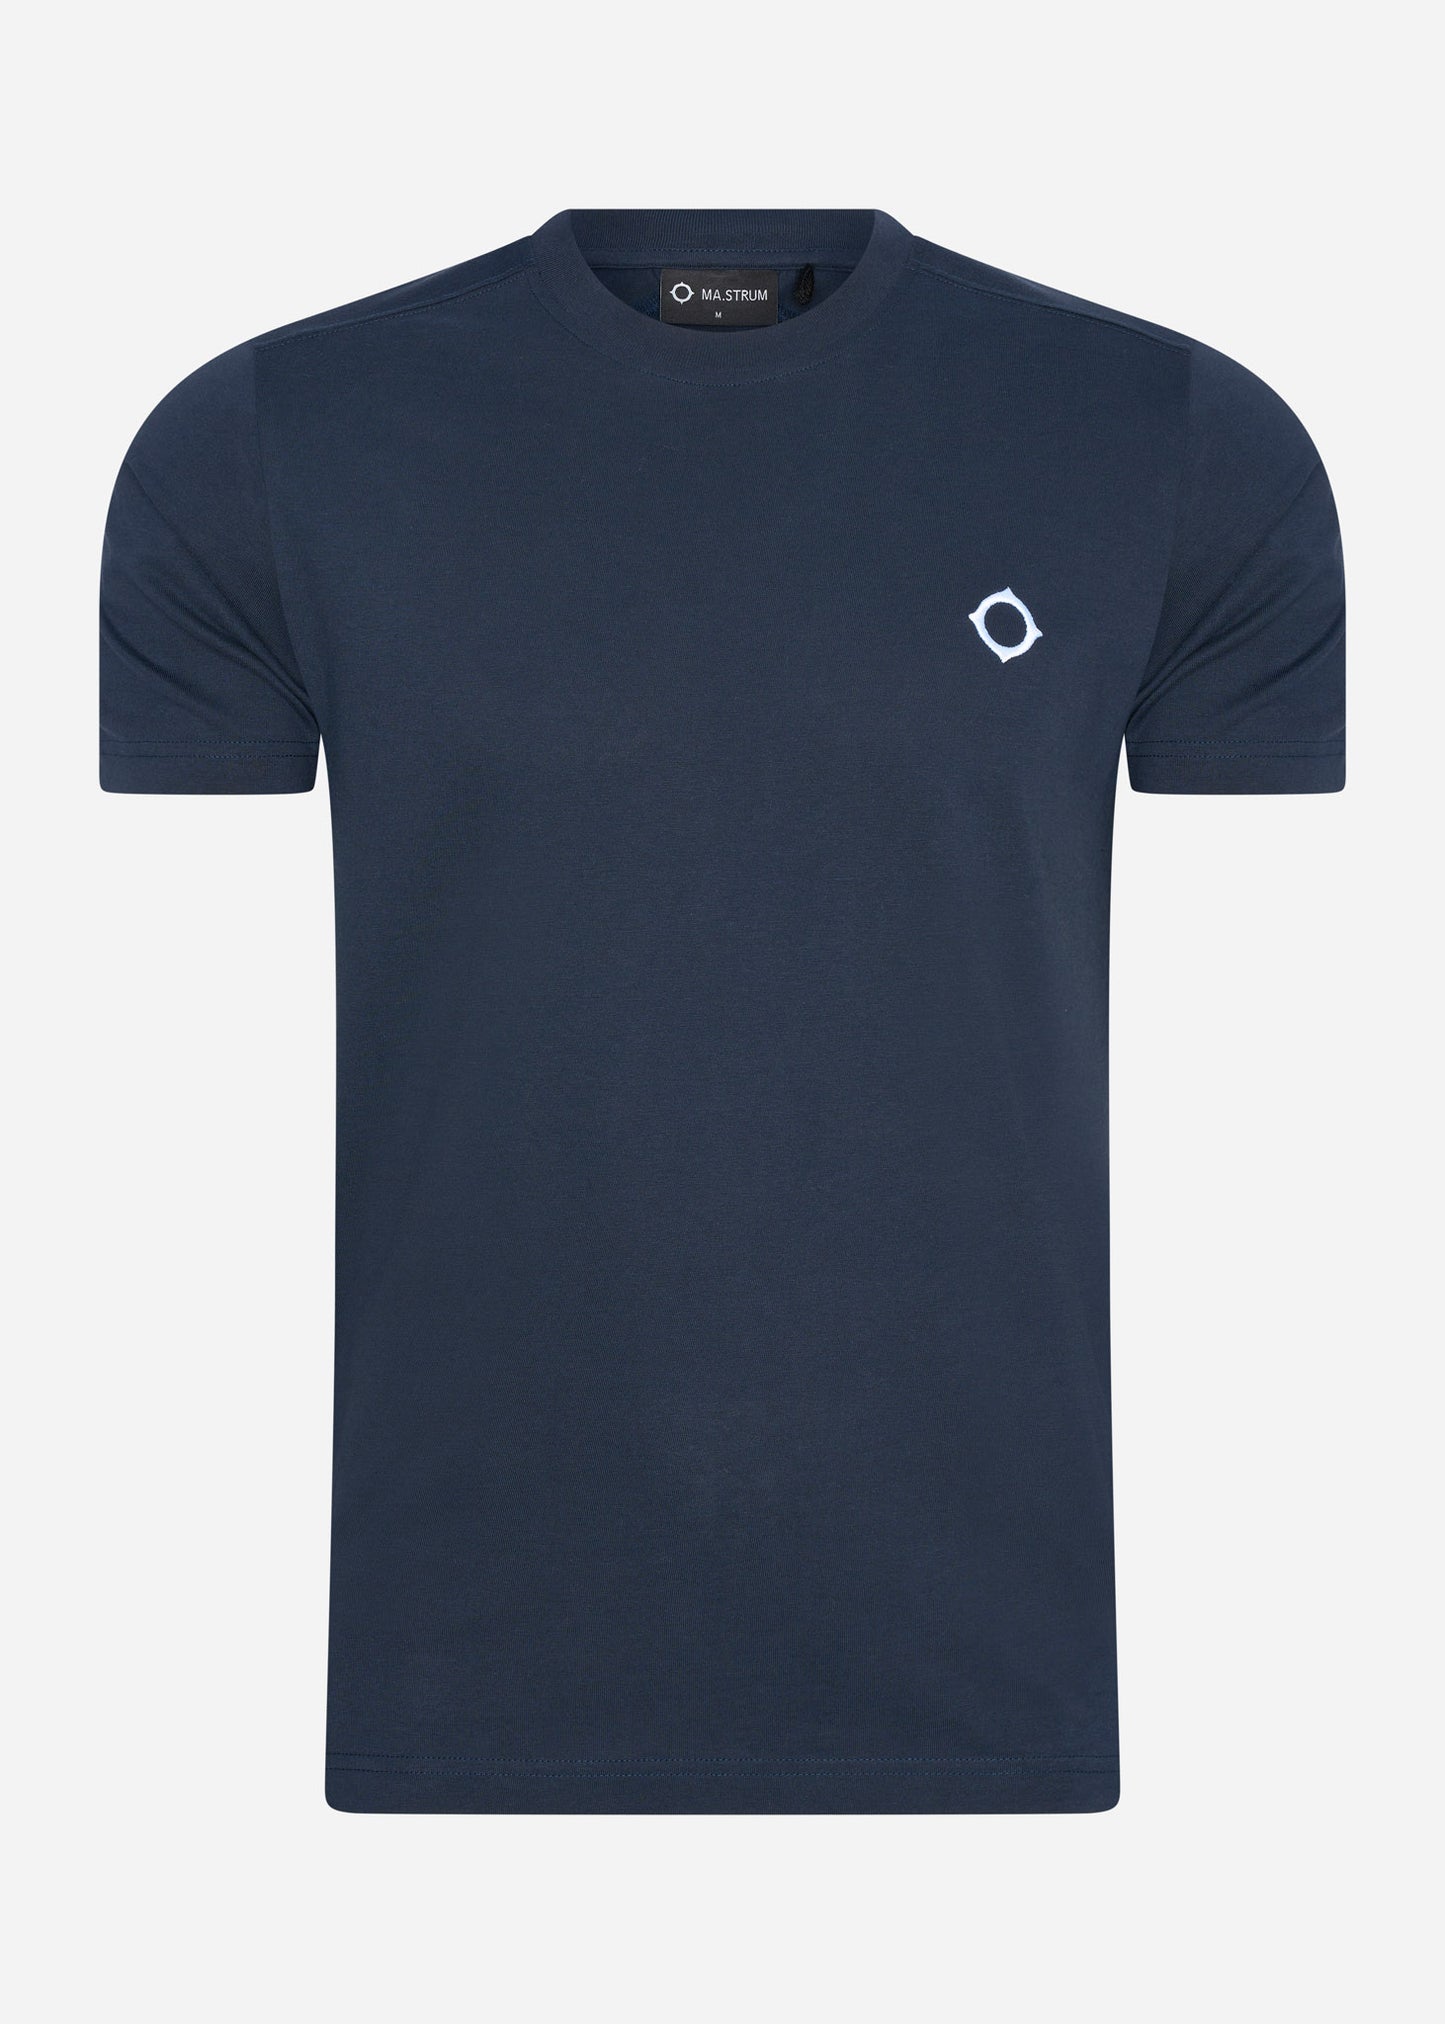 SS icon tee - ink navy - MA.Strum